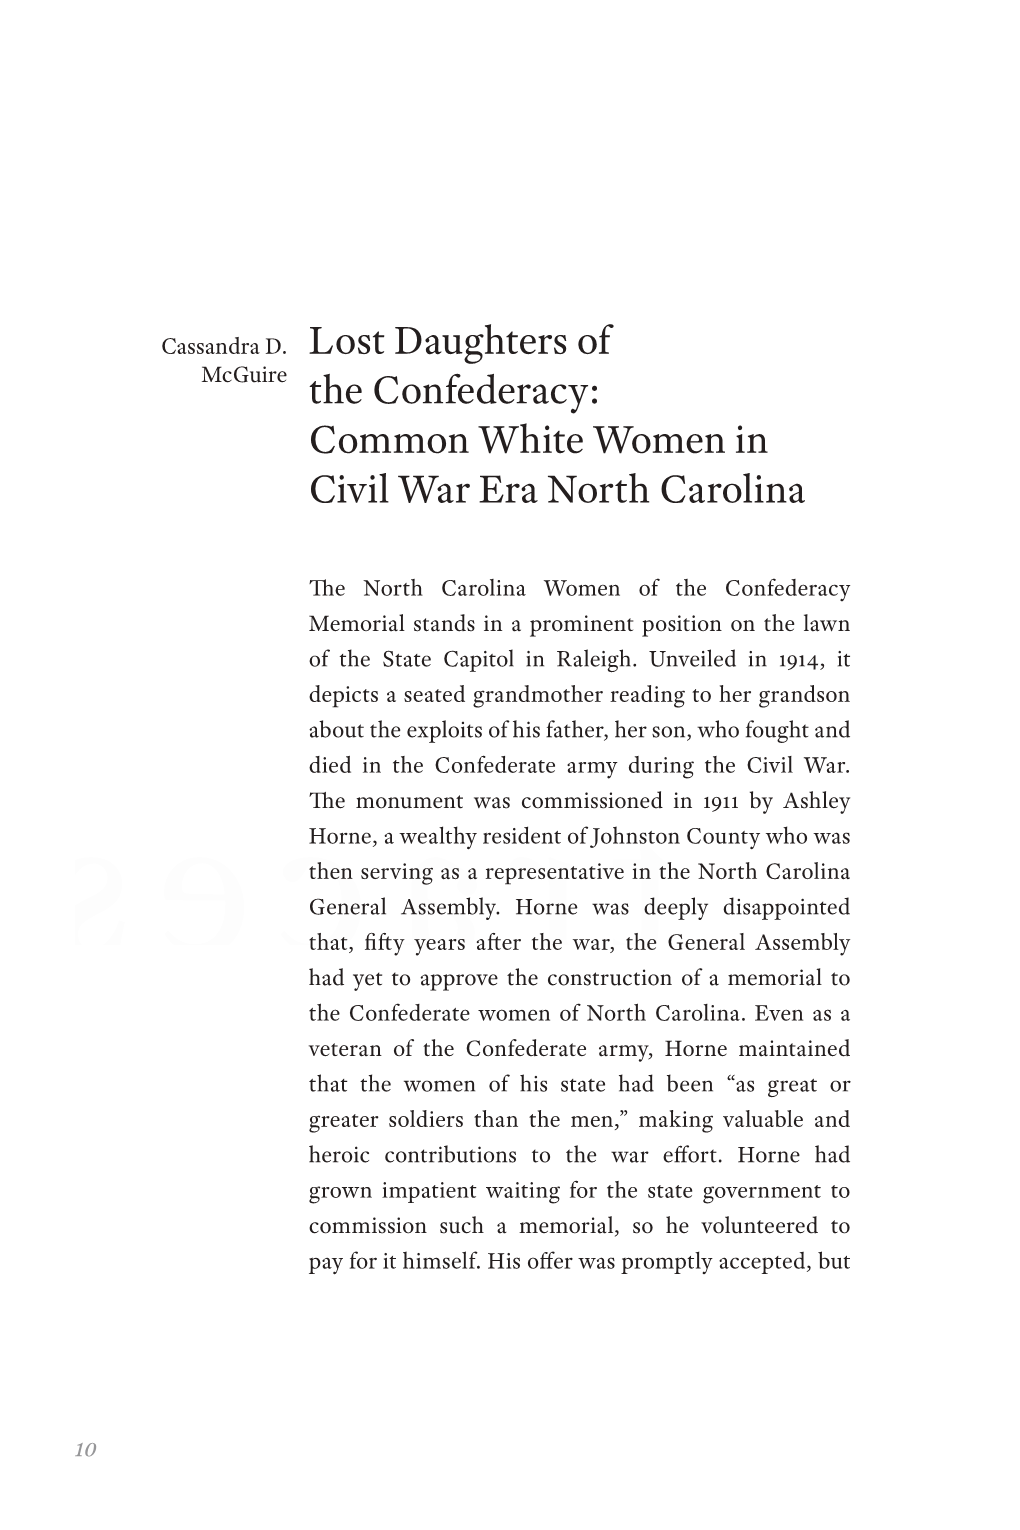 Traces of a Memorial to the Confederate Women of North Carolina